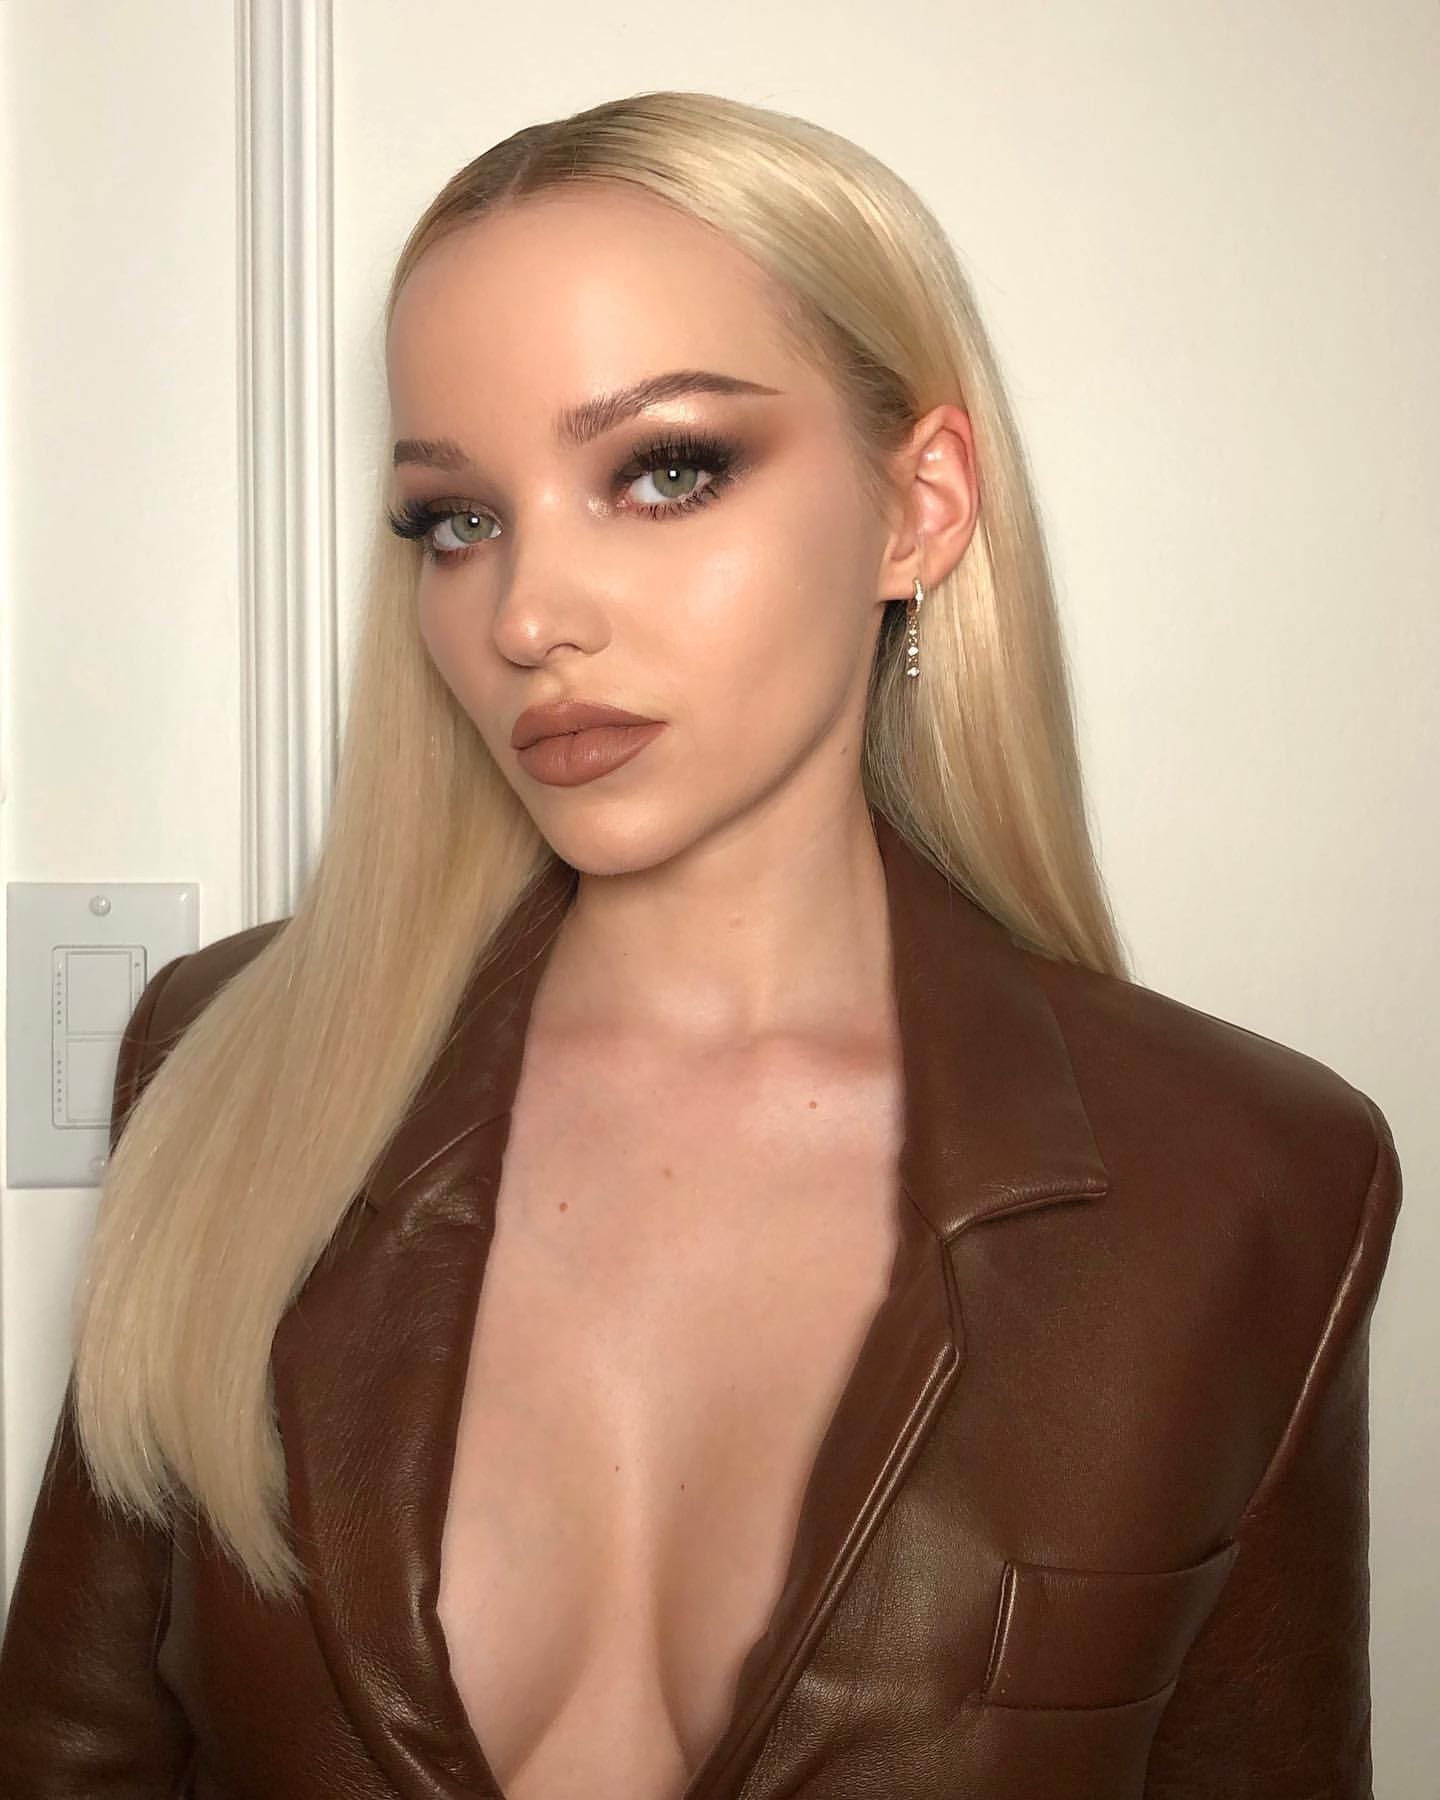 Dove Cameron - Page 2 pictures, naked, oops, topless, bikini, video, nipple